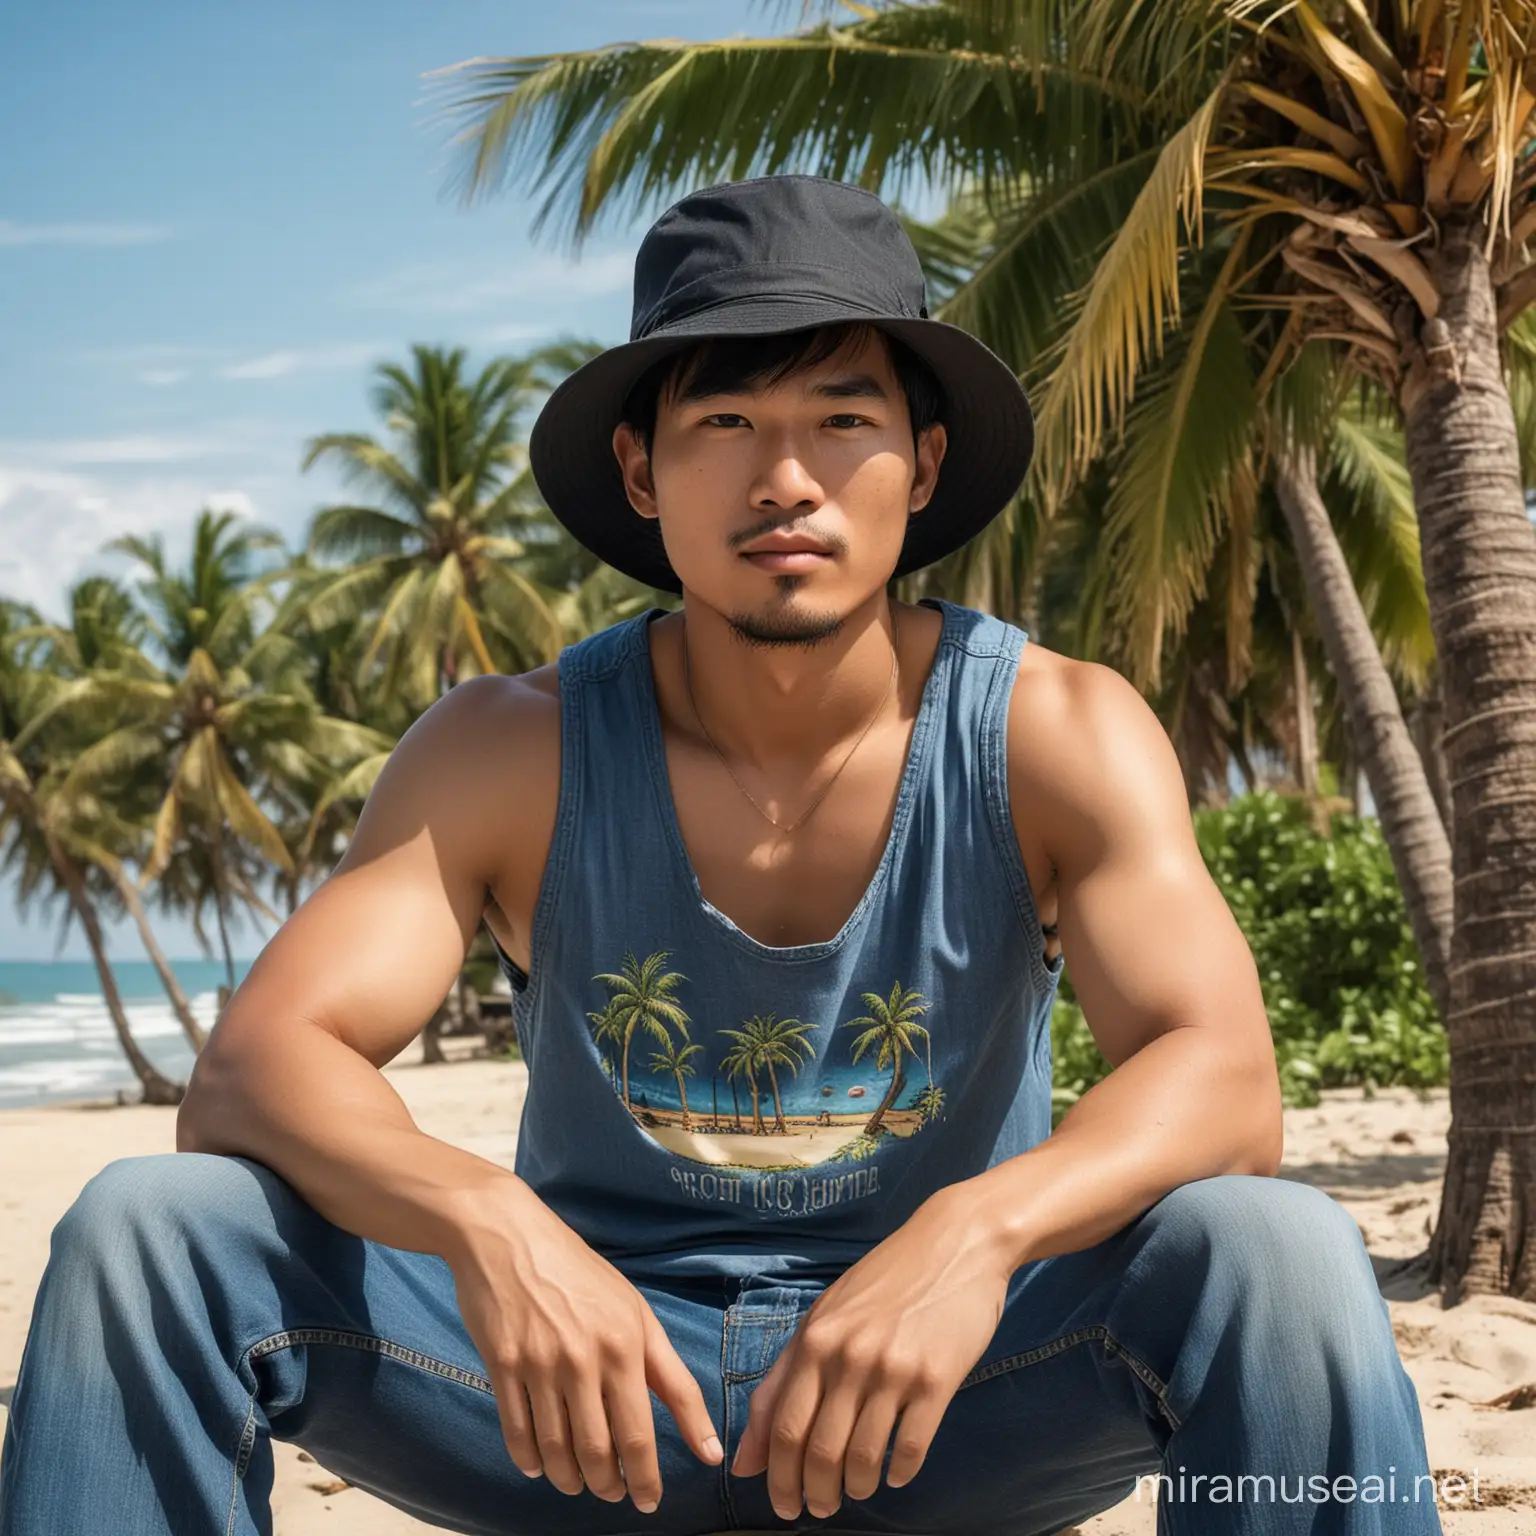 Asian Man Relaxing on Beach with Coconut Tree Background